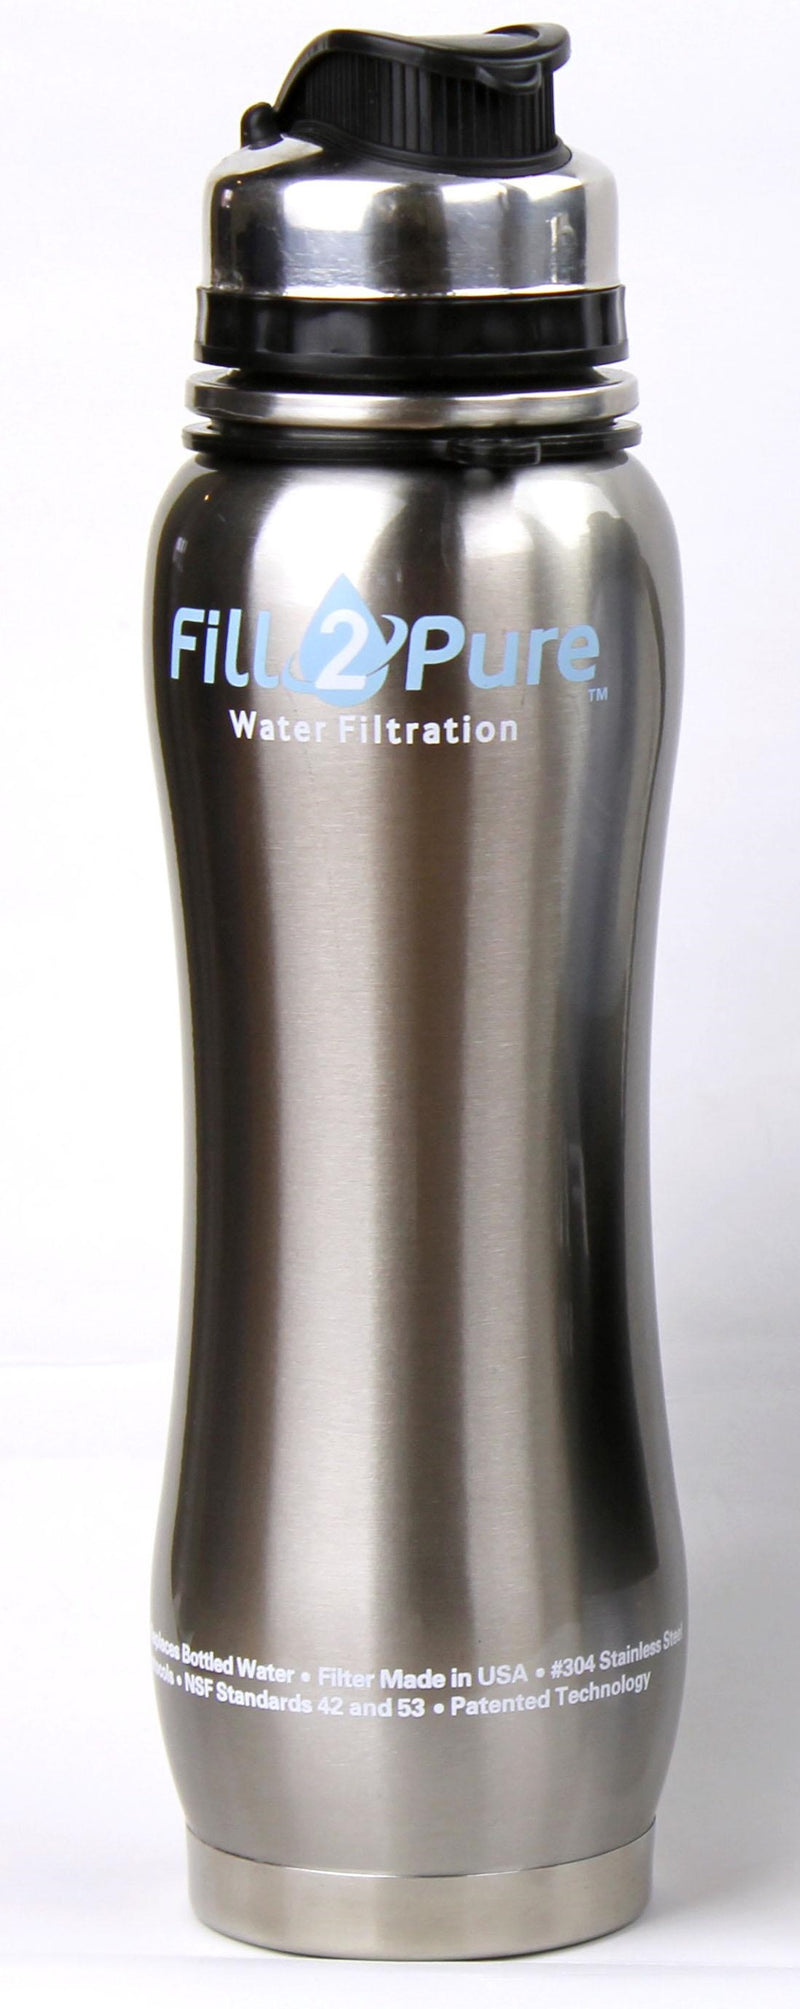 New Fill 2 pure water filtration systems stainless water bottle with f